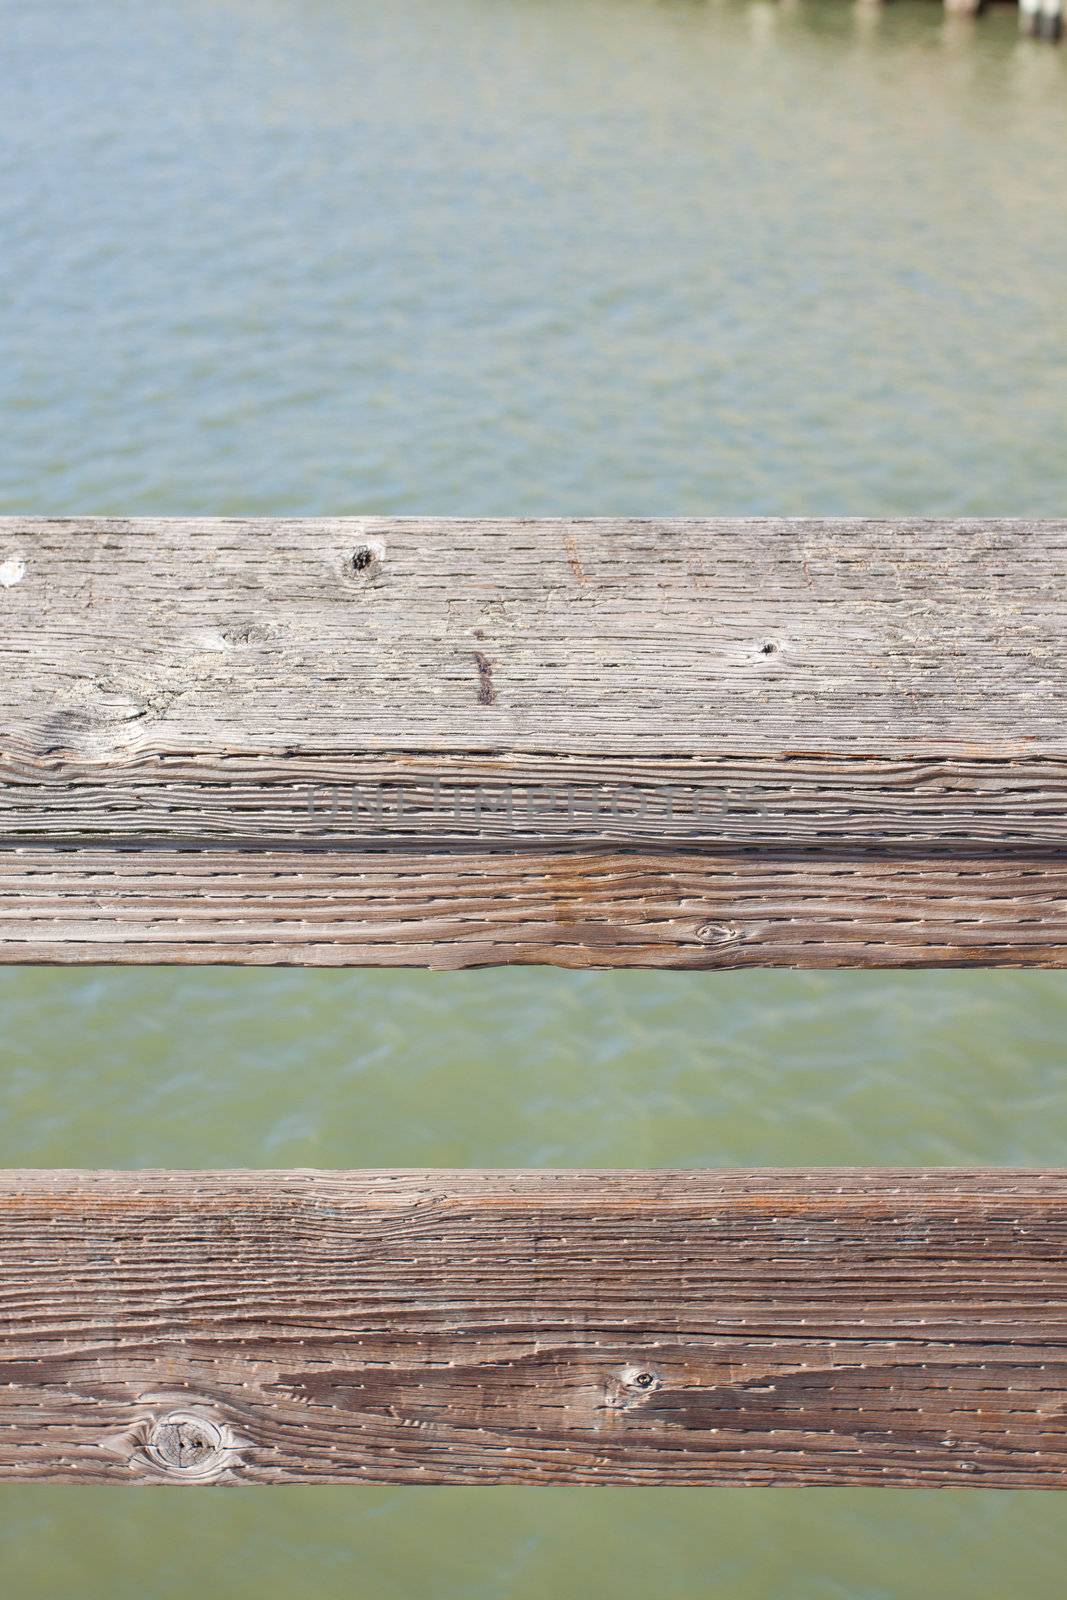 The railing of a pier is photographed in an abstract way to create some interesting texture images of wood and water.